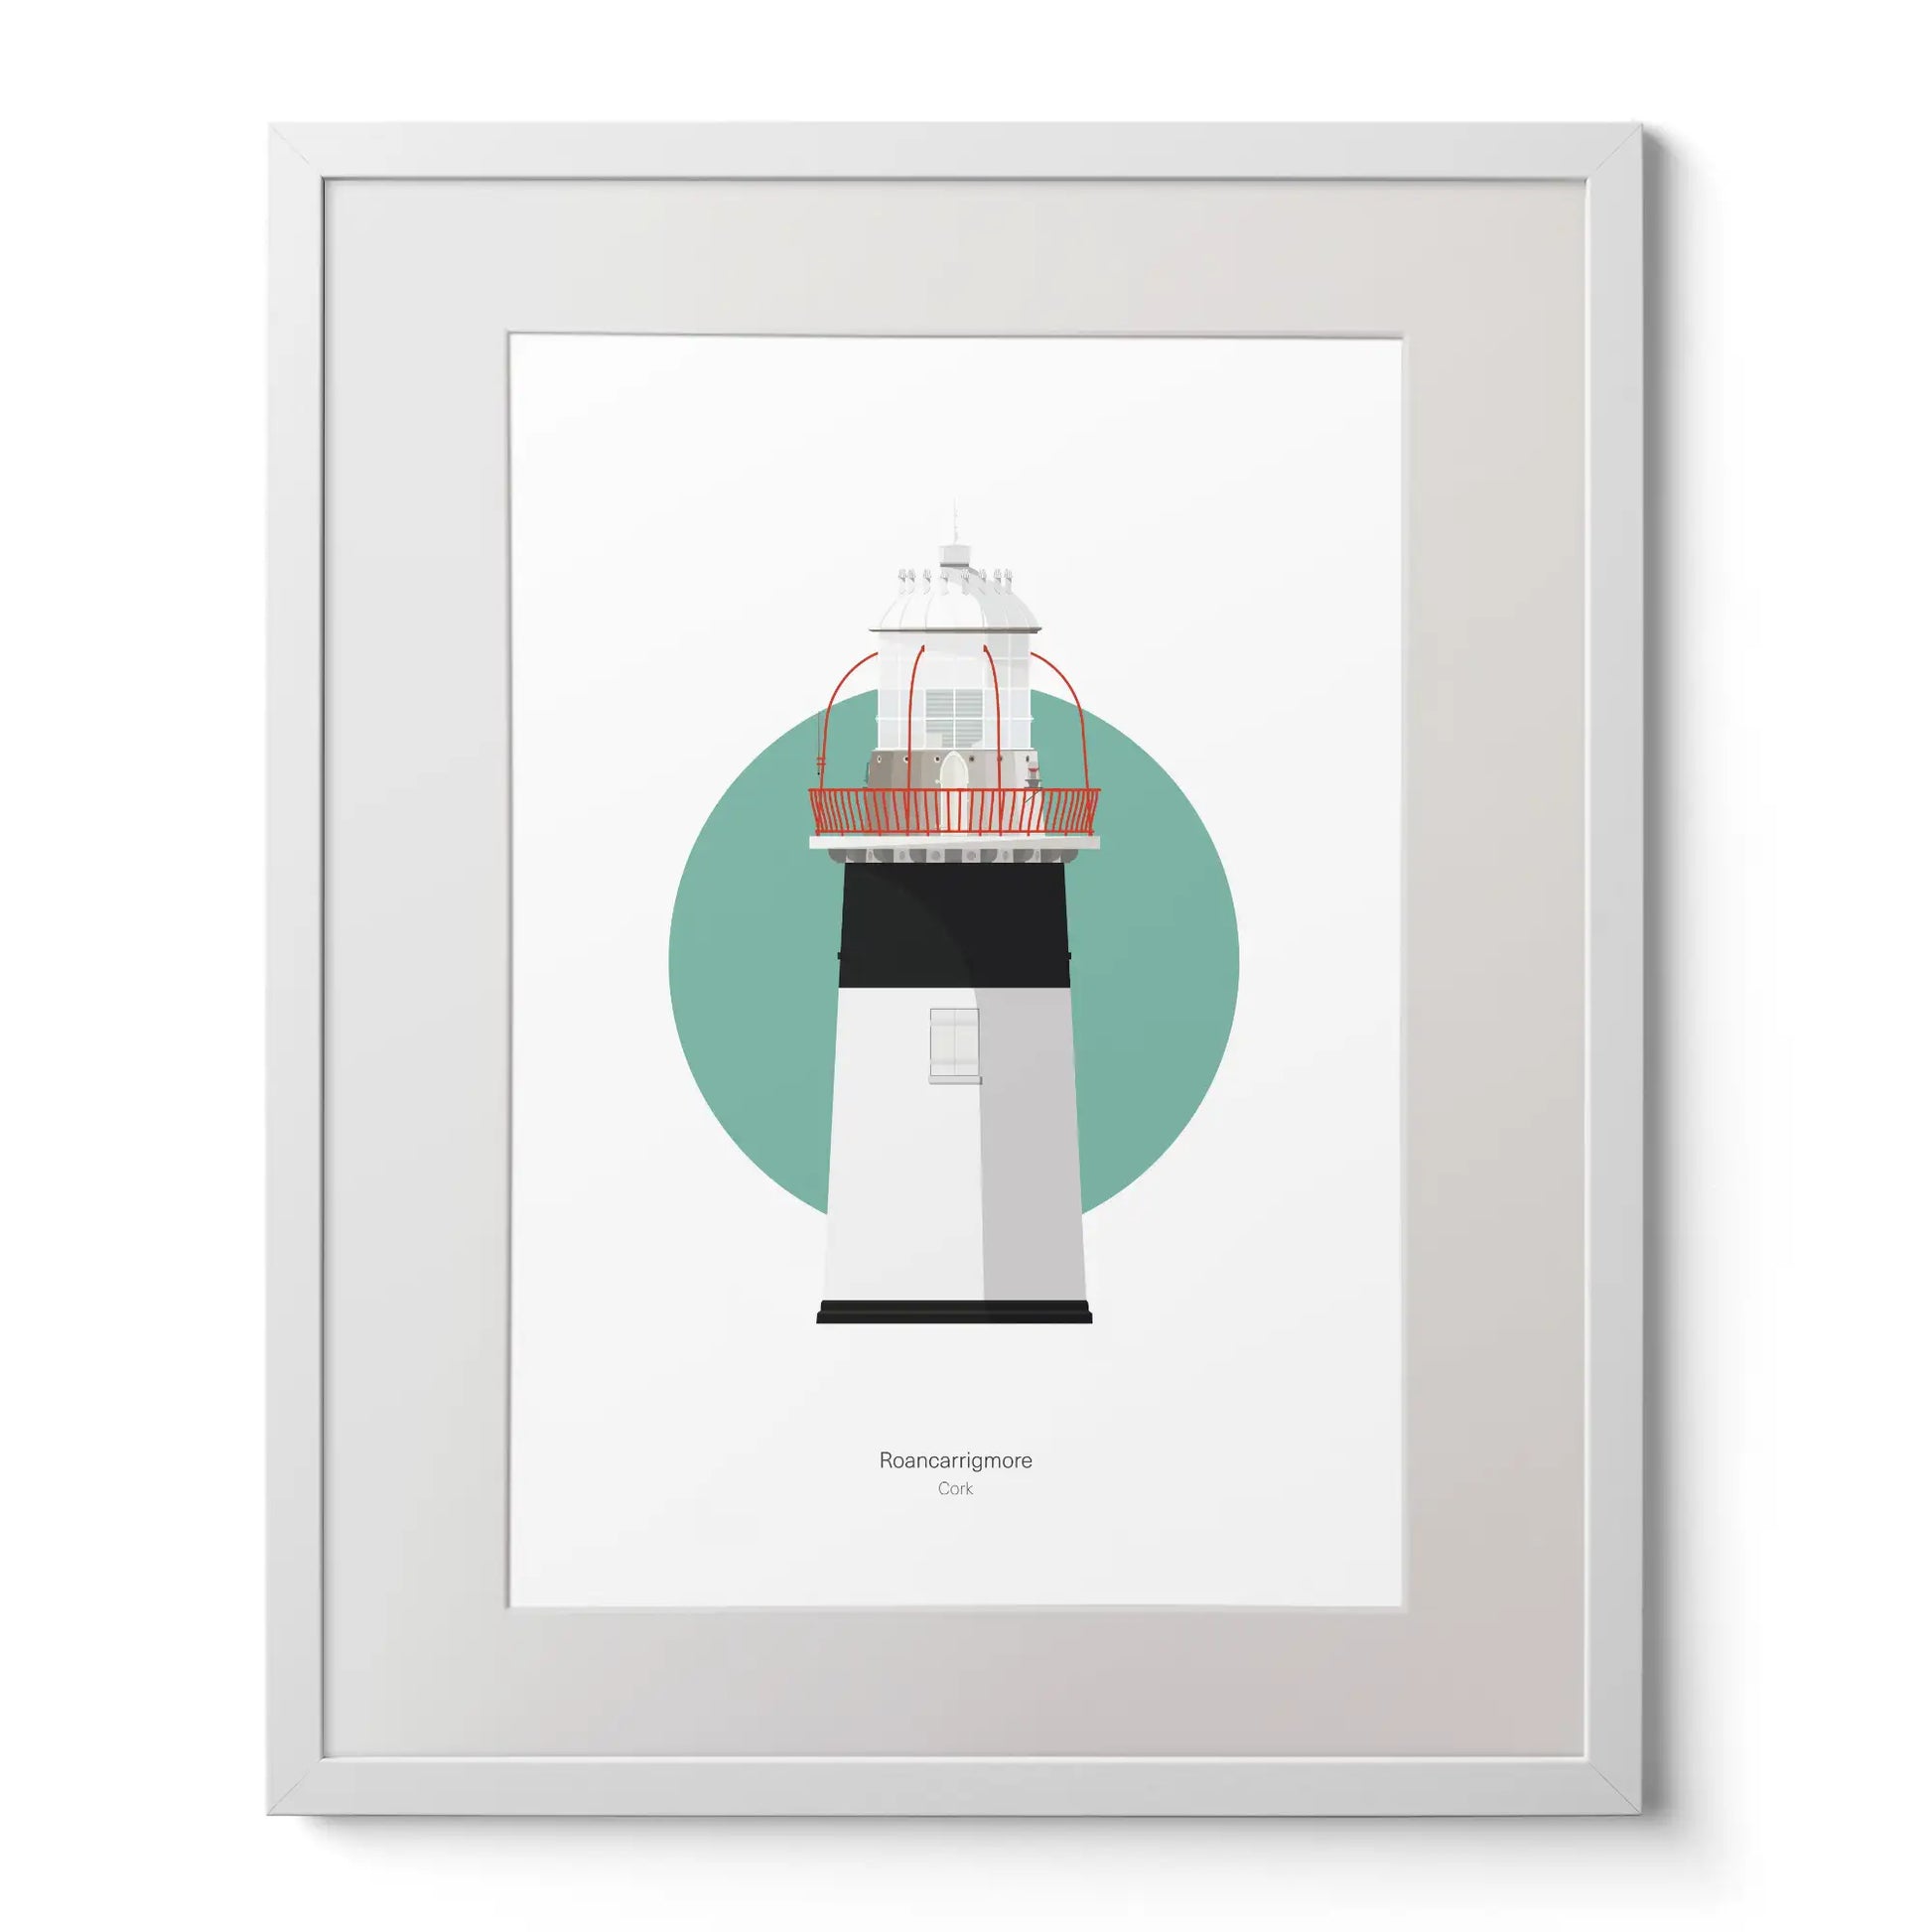 Illustration of Roancarrigmore lighthouse on a white background inside light blue square,  in a white frame measuring 40x50cm.